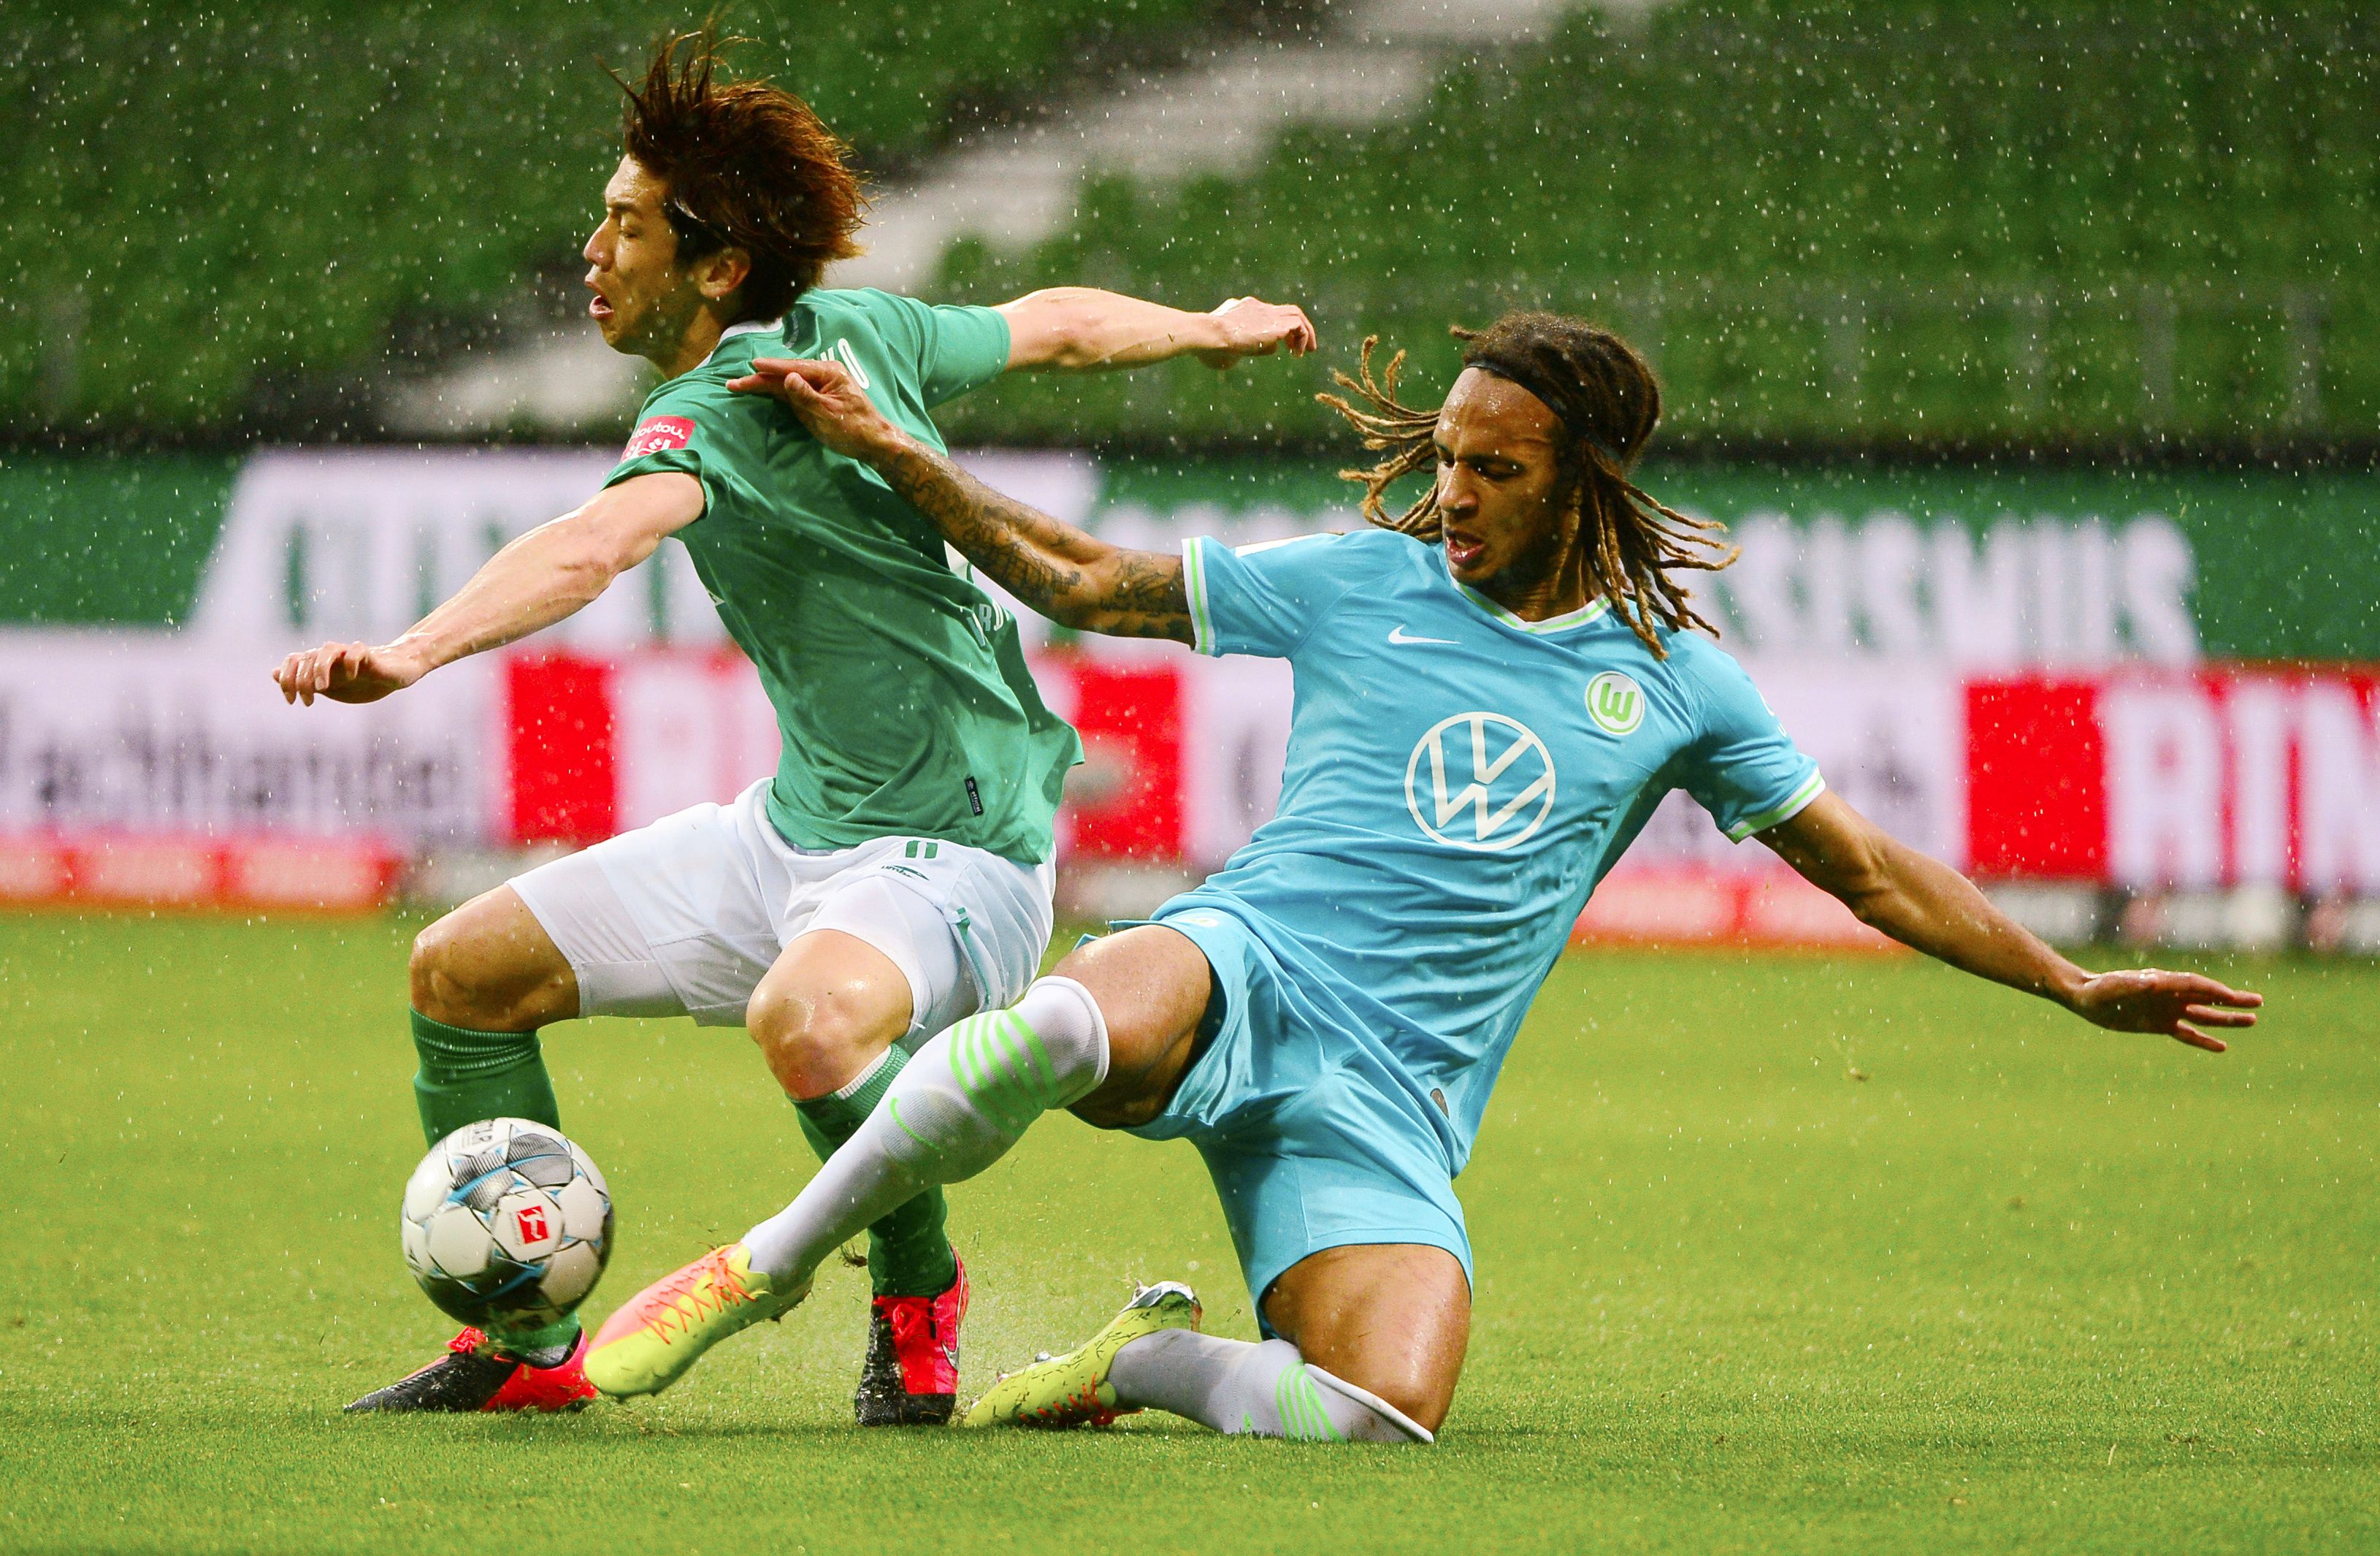 Werder Bremen's Yuya Osako in action with Wolfsburg's Kevin Mbabu, as play resumes behind closed doors following the outbreak of the coronavirus disease (COVID-19). Photo: Reuters